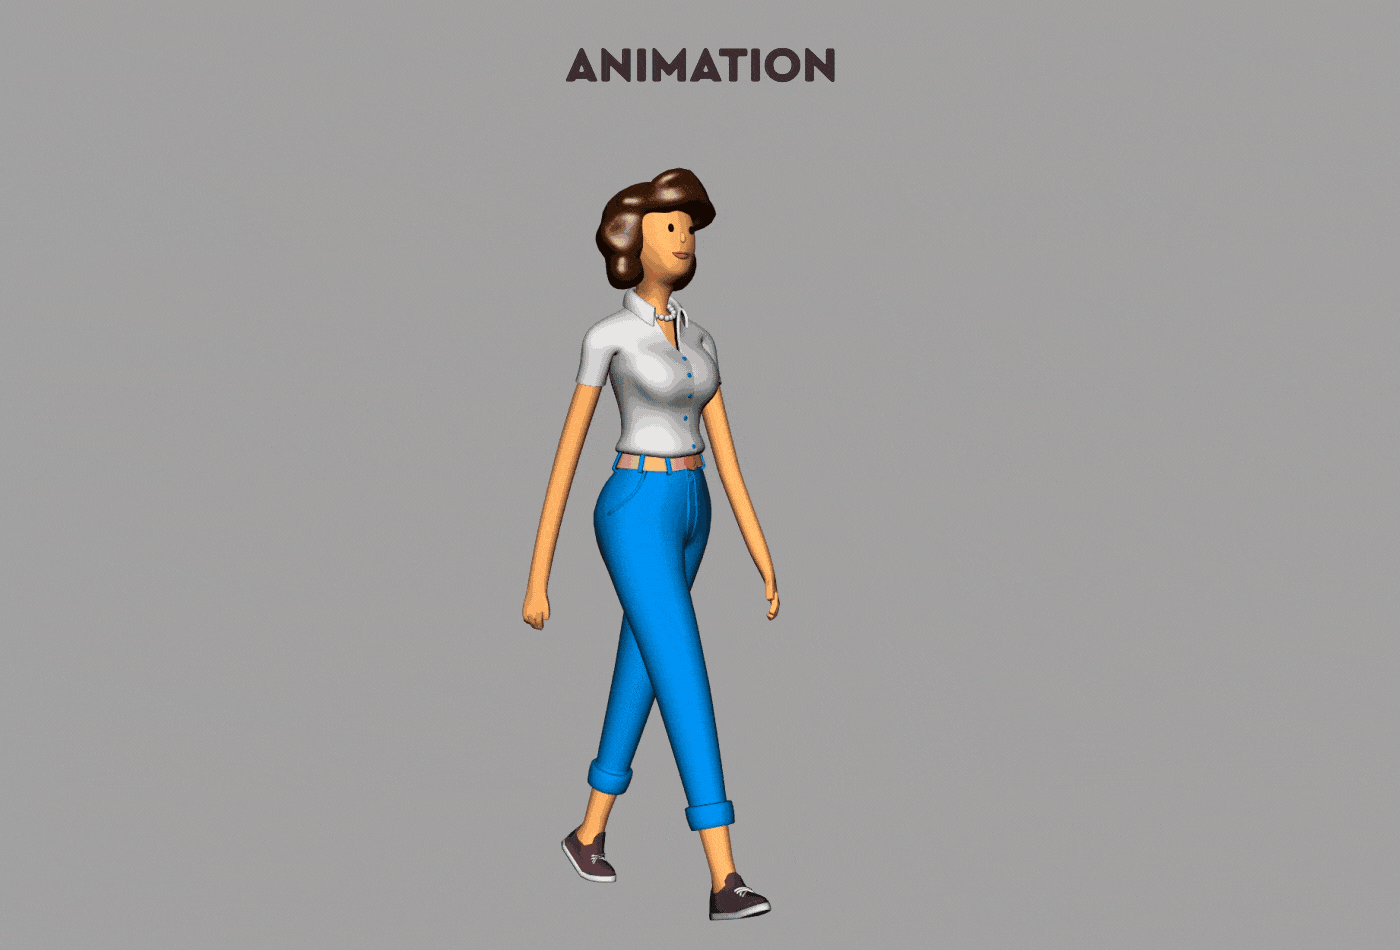 2D 3D animation  c4d Character cinema4d motiondesign motiongraphic redgiant redshift